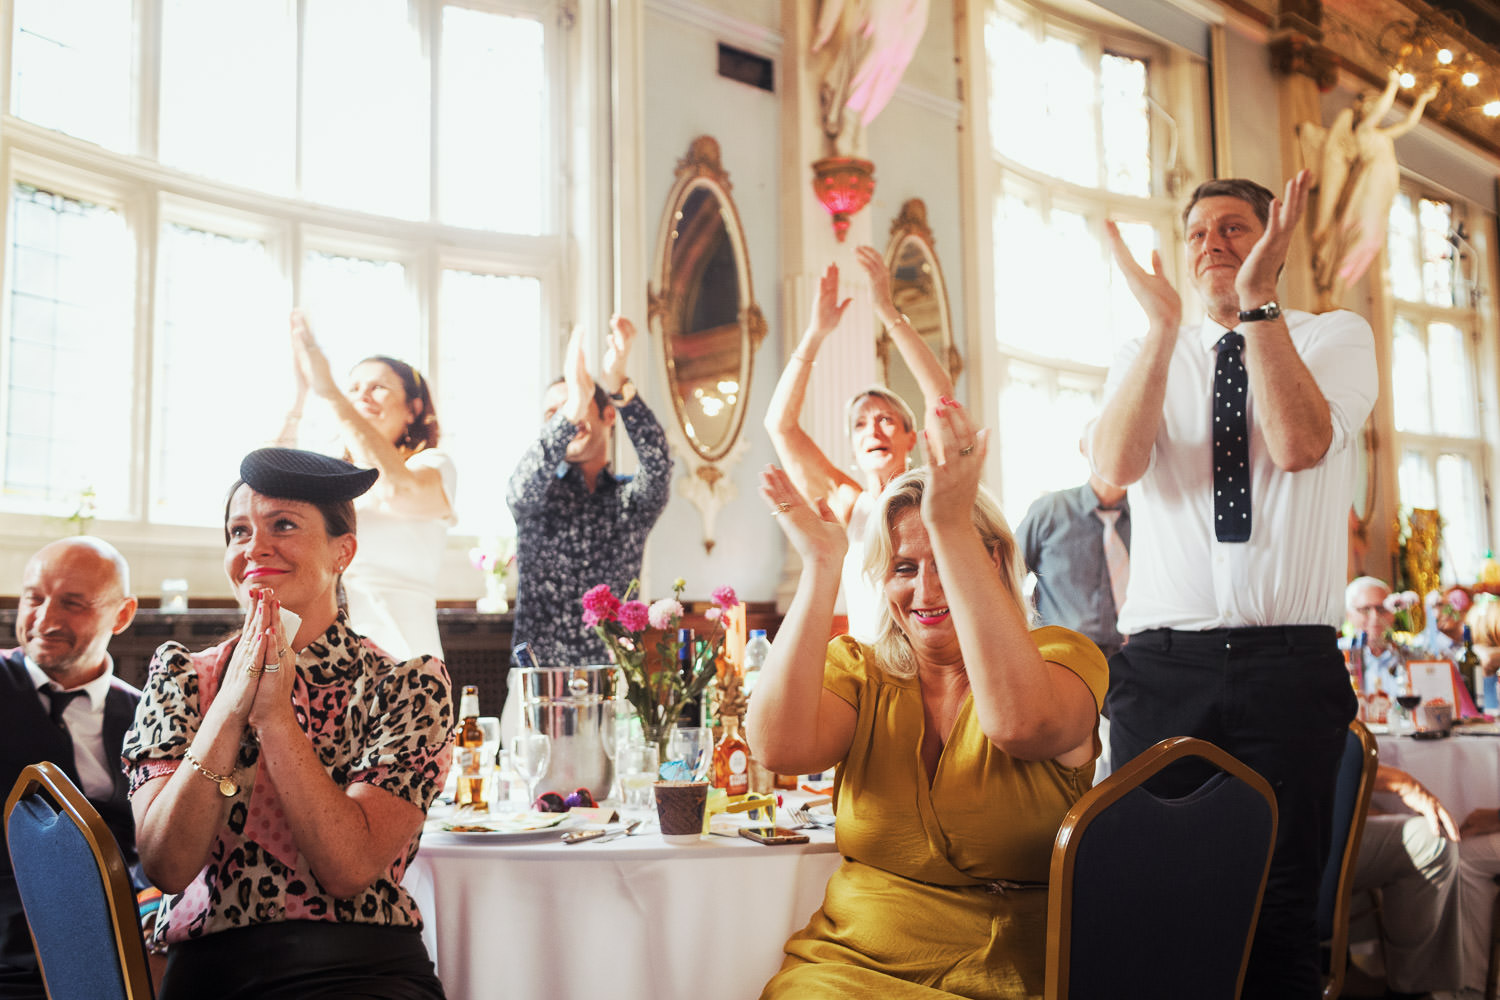 Wedding guests clapping the speeches at a table.